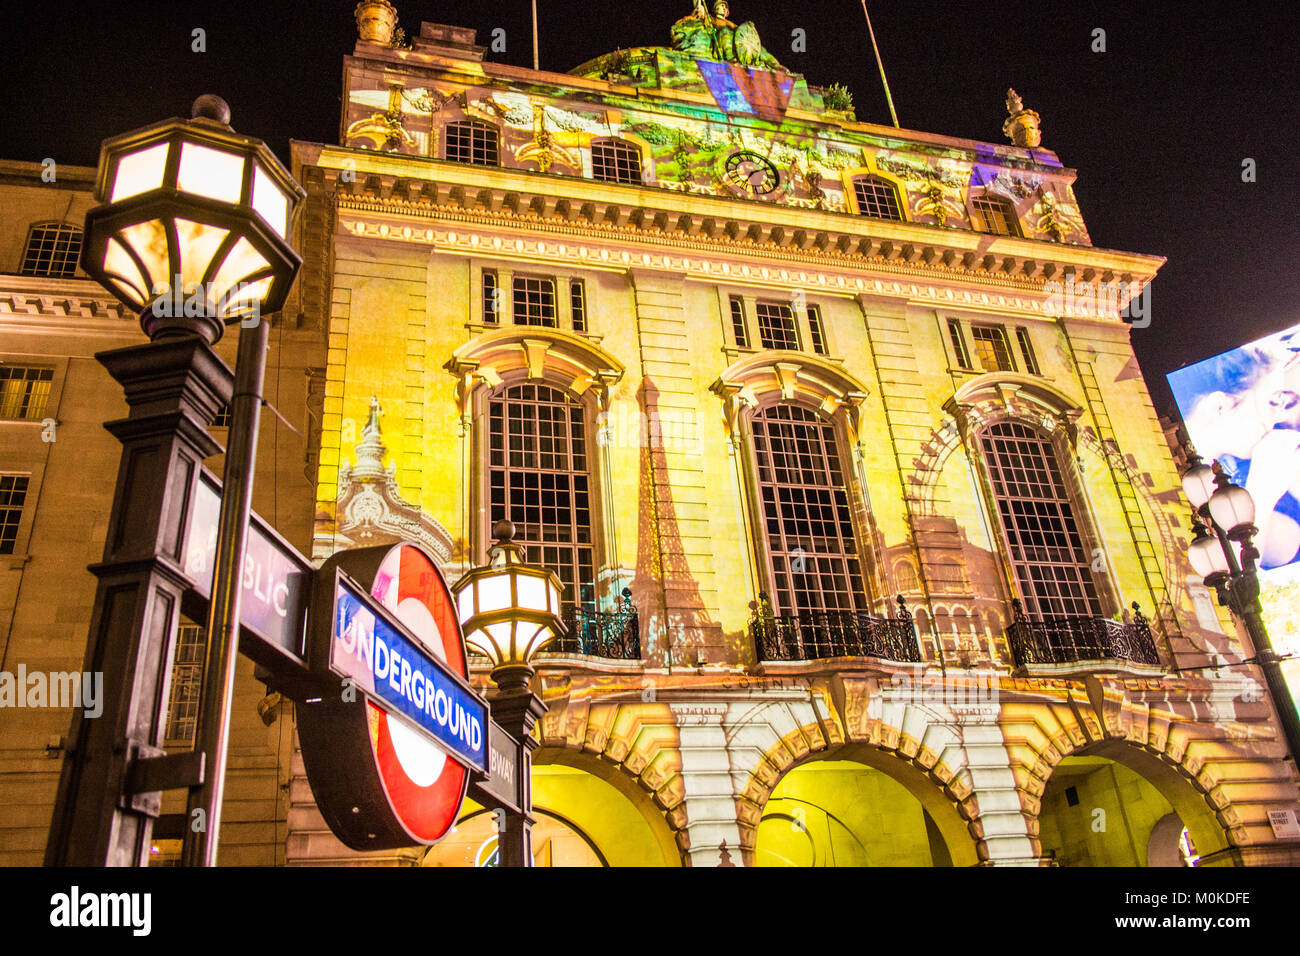 'Lumiere' Light Festival in Piccadilly Circus, London,. Stock Photo